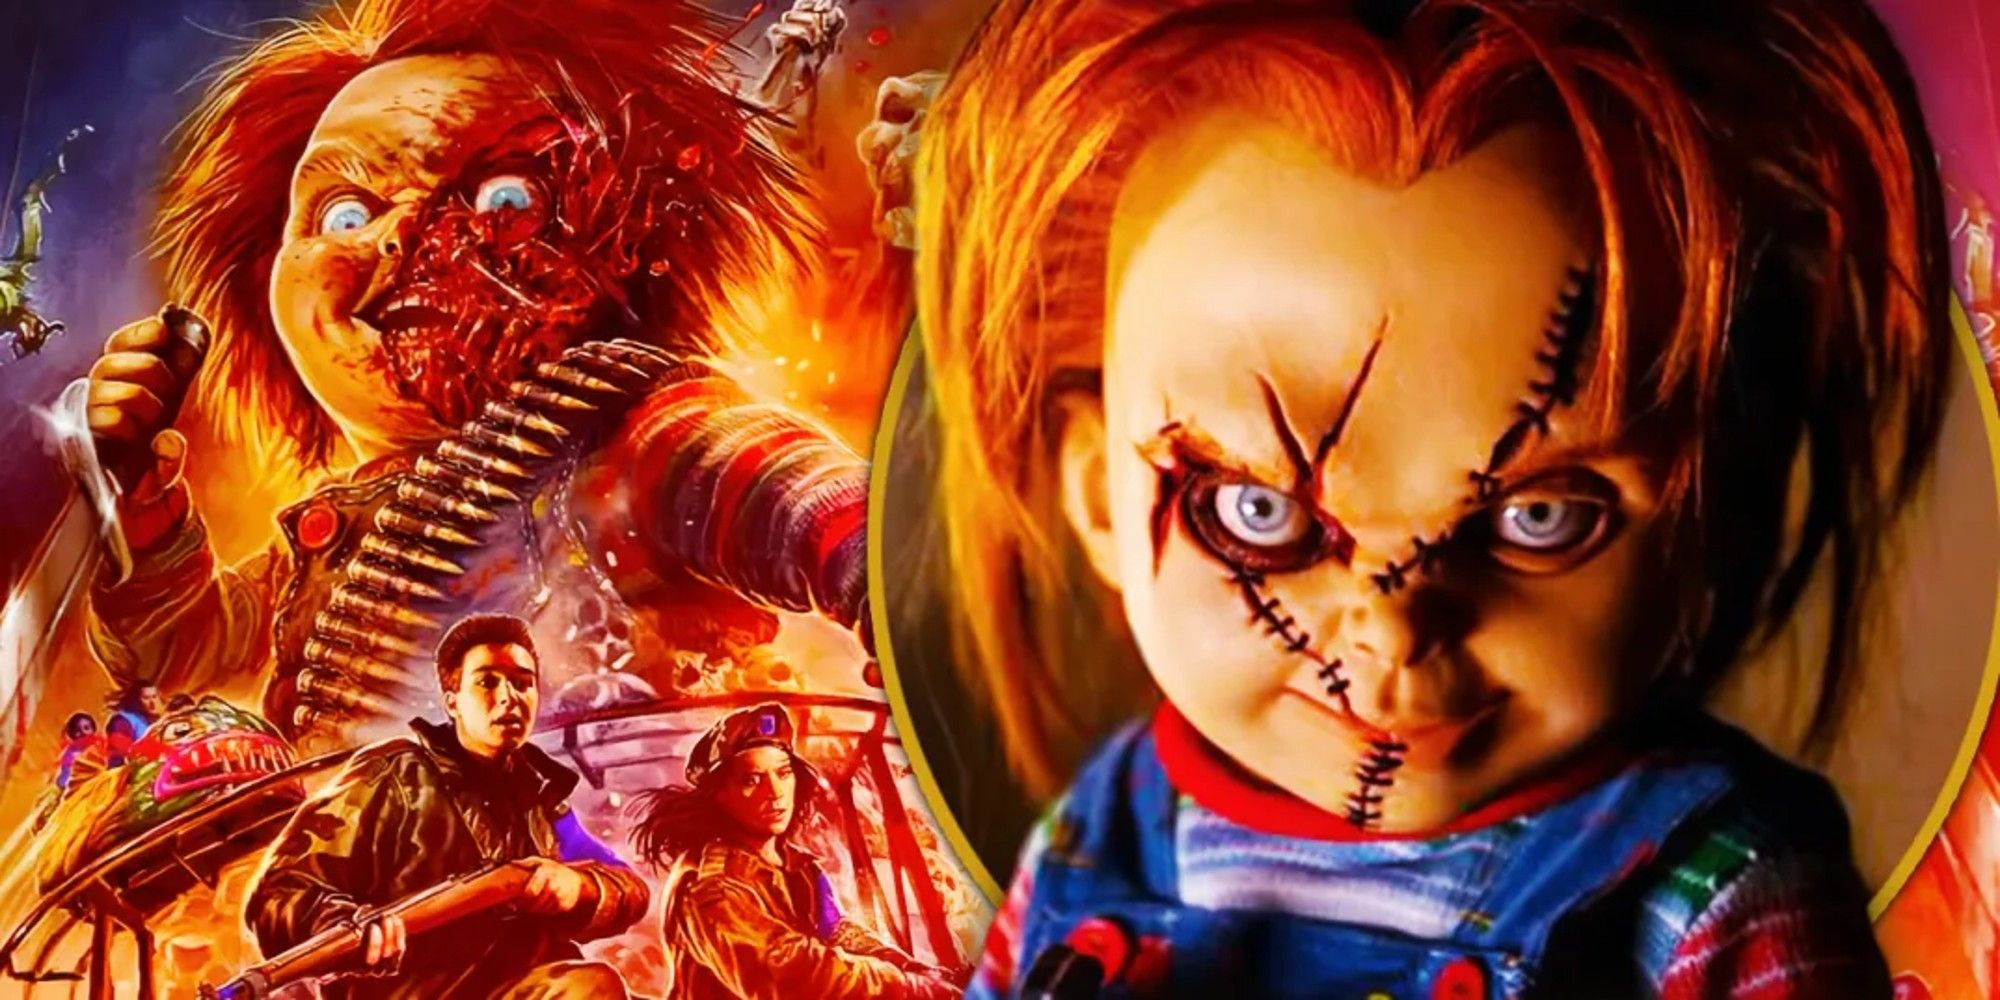 an SR custom image of different images of Chucky the killer doll